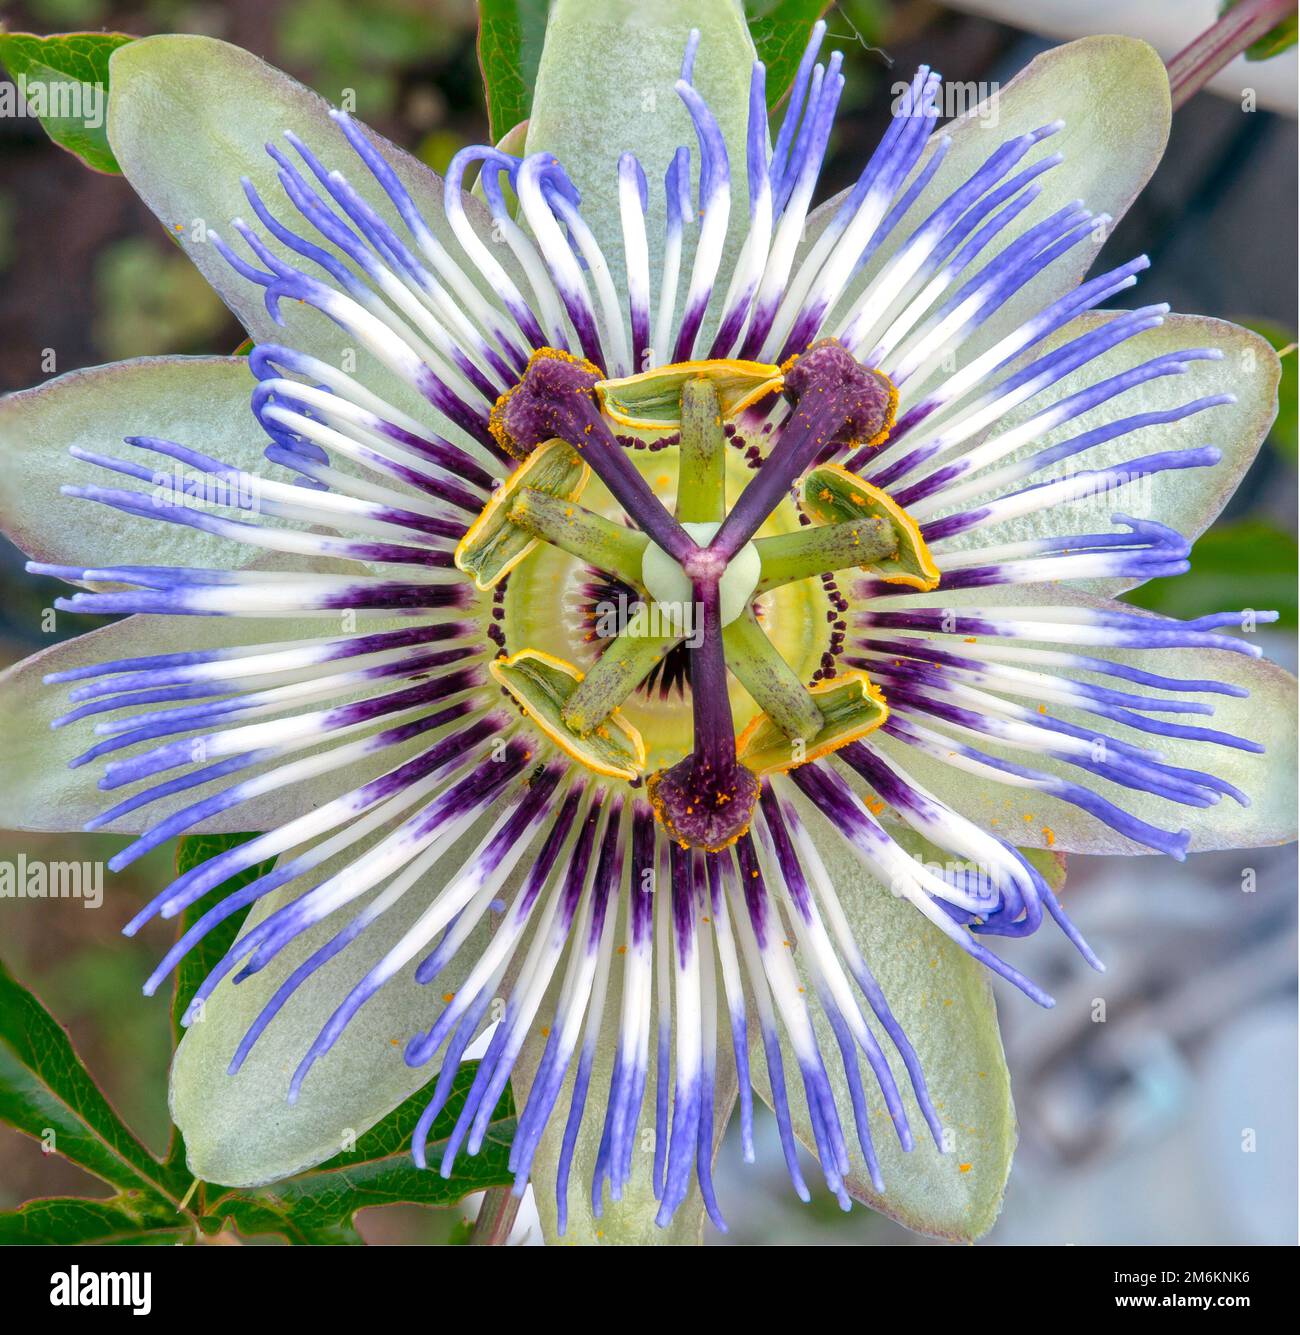 Passiflora. The Blue or Blue crown passionflower.  Selective focus on the parts of the flower Ovary, Stigma, Style and Anther. Stock Photo